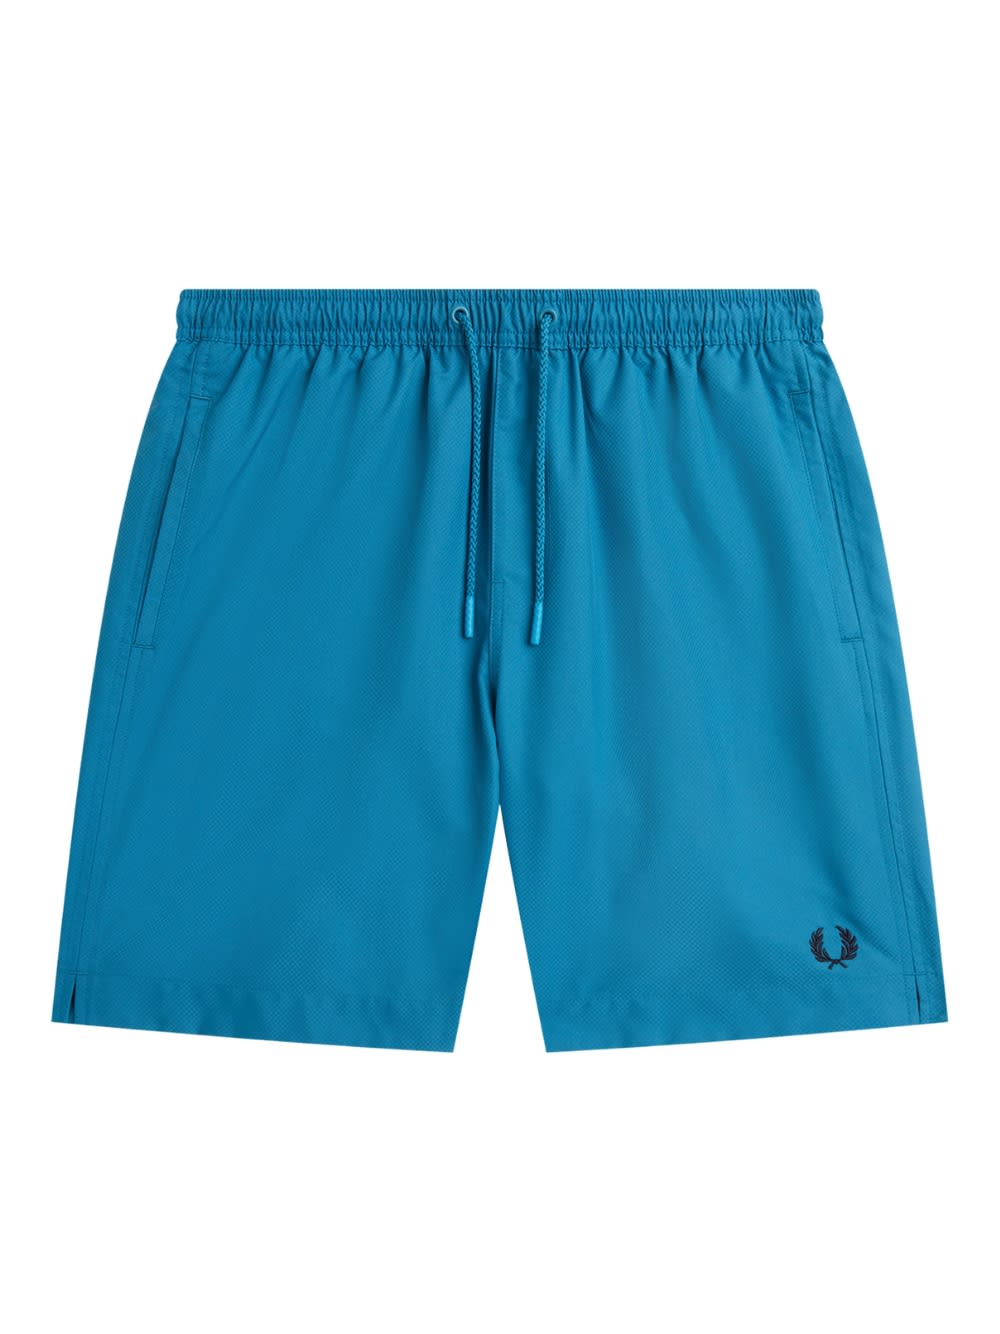 FRED PERRY FP CLASSIC SWIMSHORT